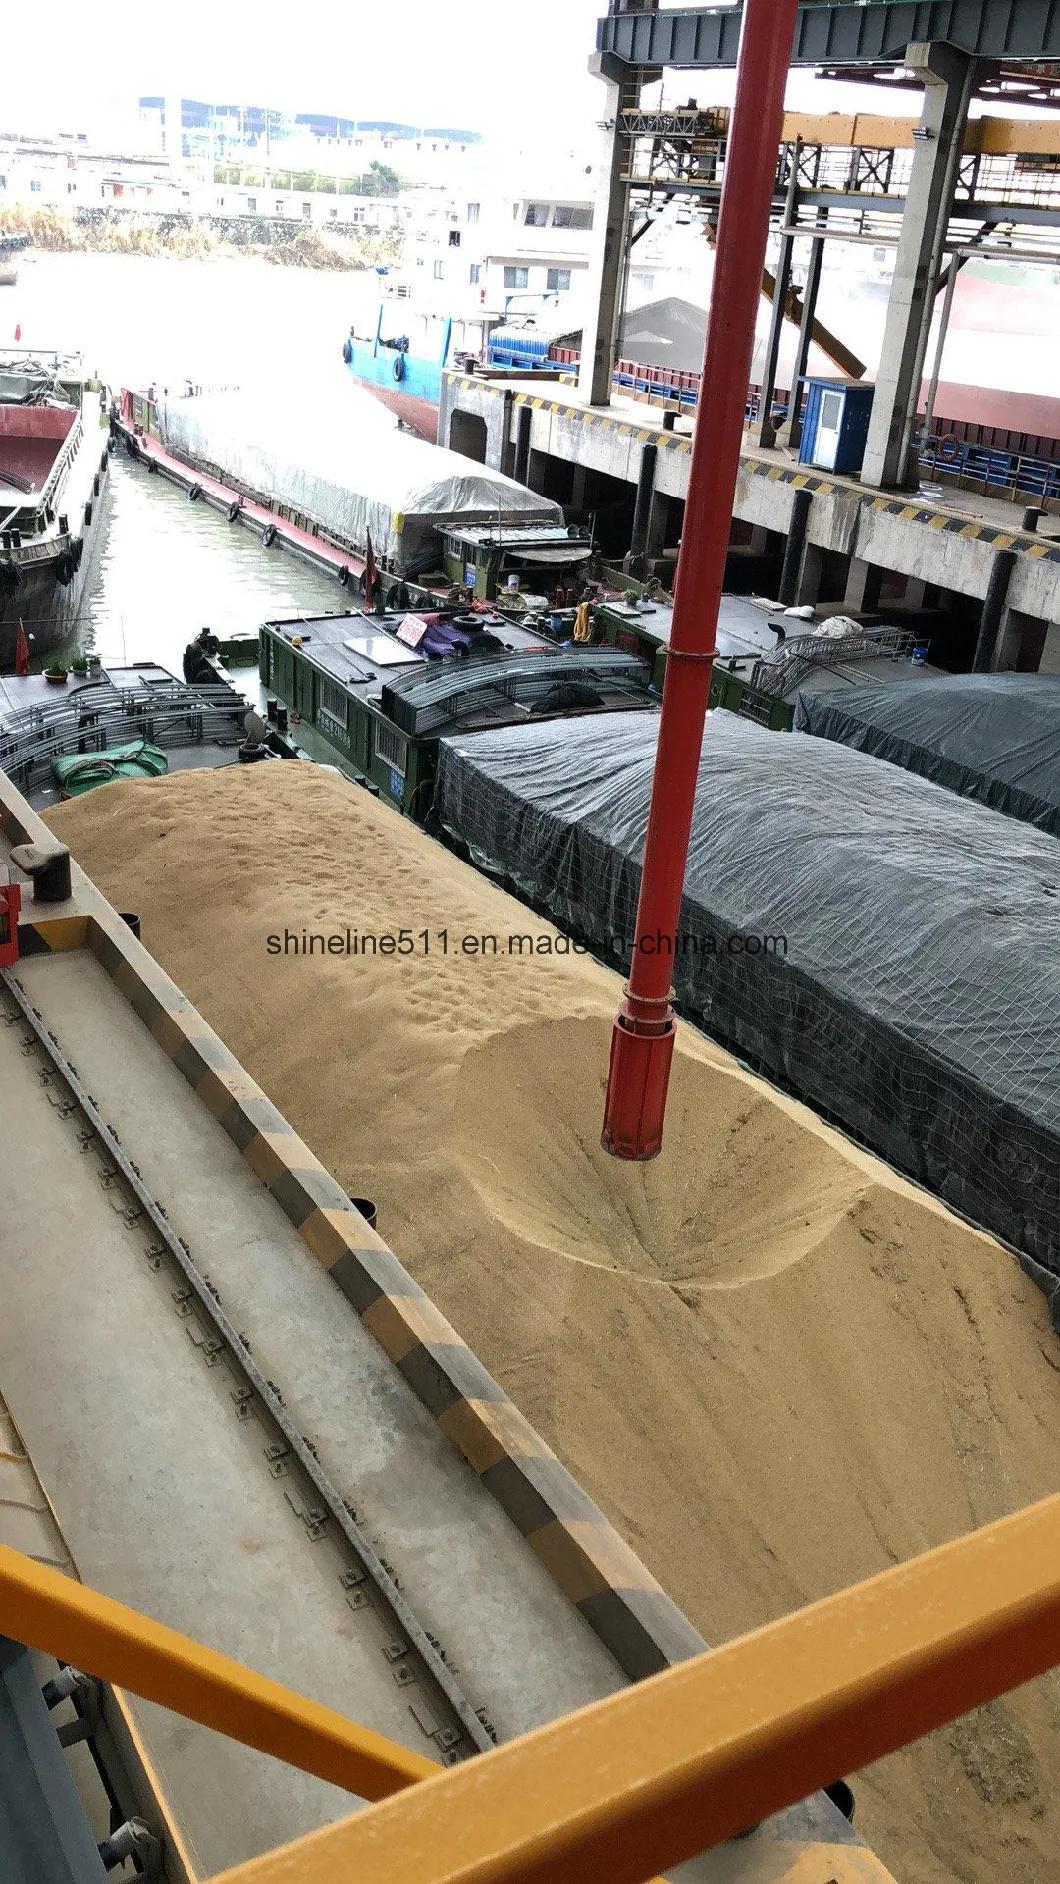 Available New Xiangliang Brand Standard Exportatiion Packing Hopper Storage Grain Unloader